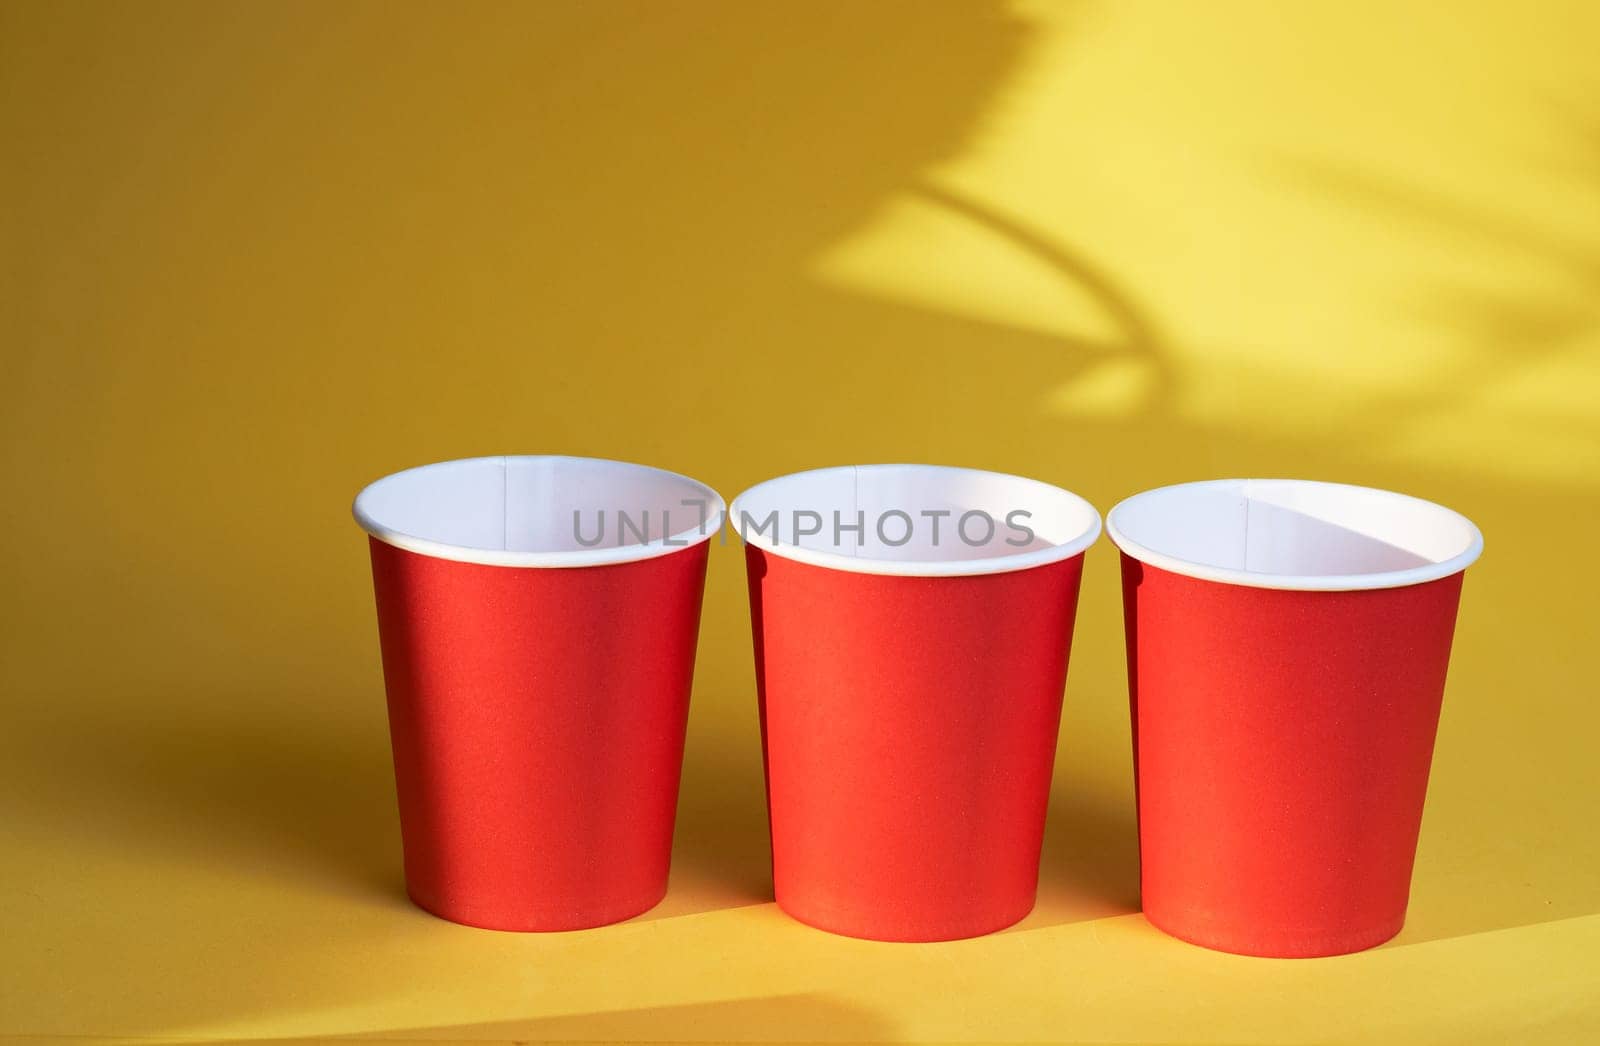 three red paper coffee cups on a yellow background is a morning concept